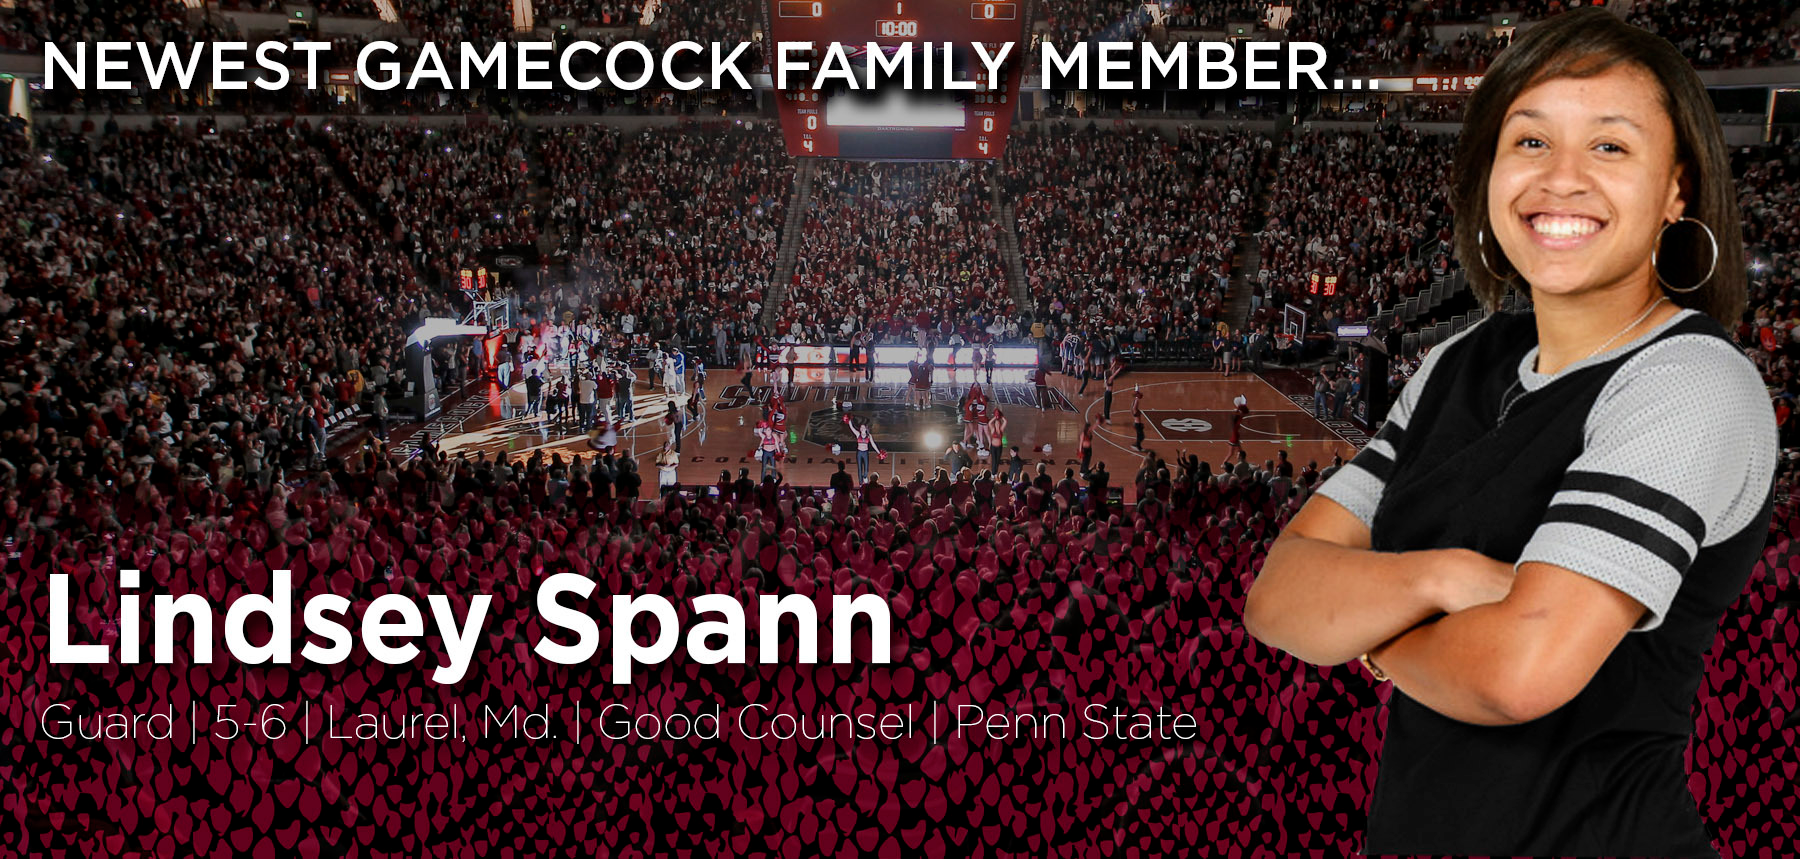 Graduate Transfer Lindsey Spann Signs with Gamecocks